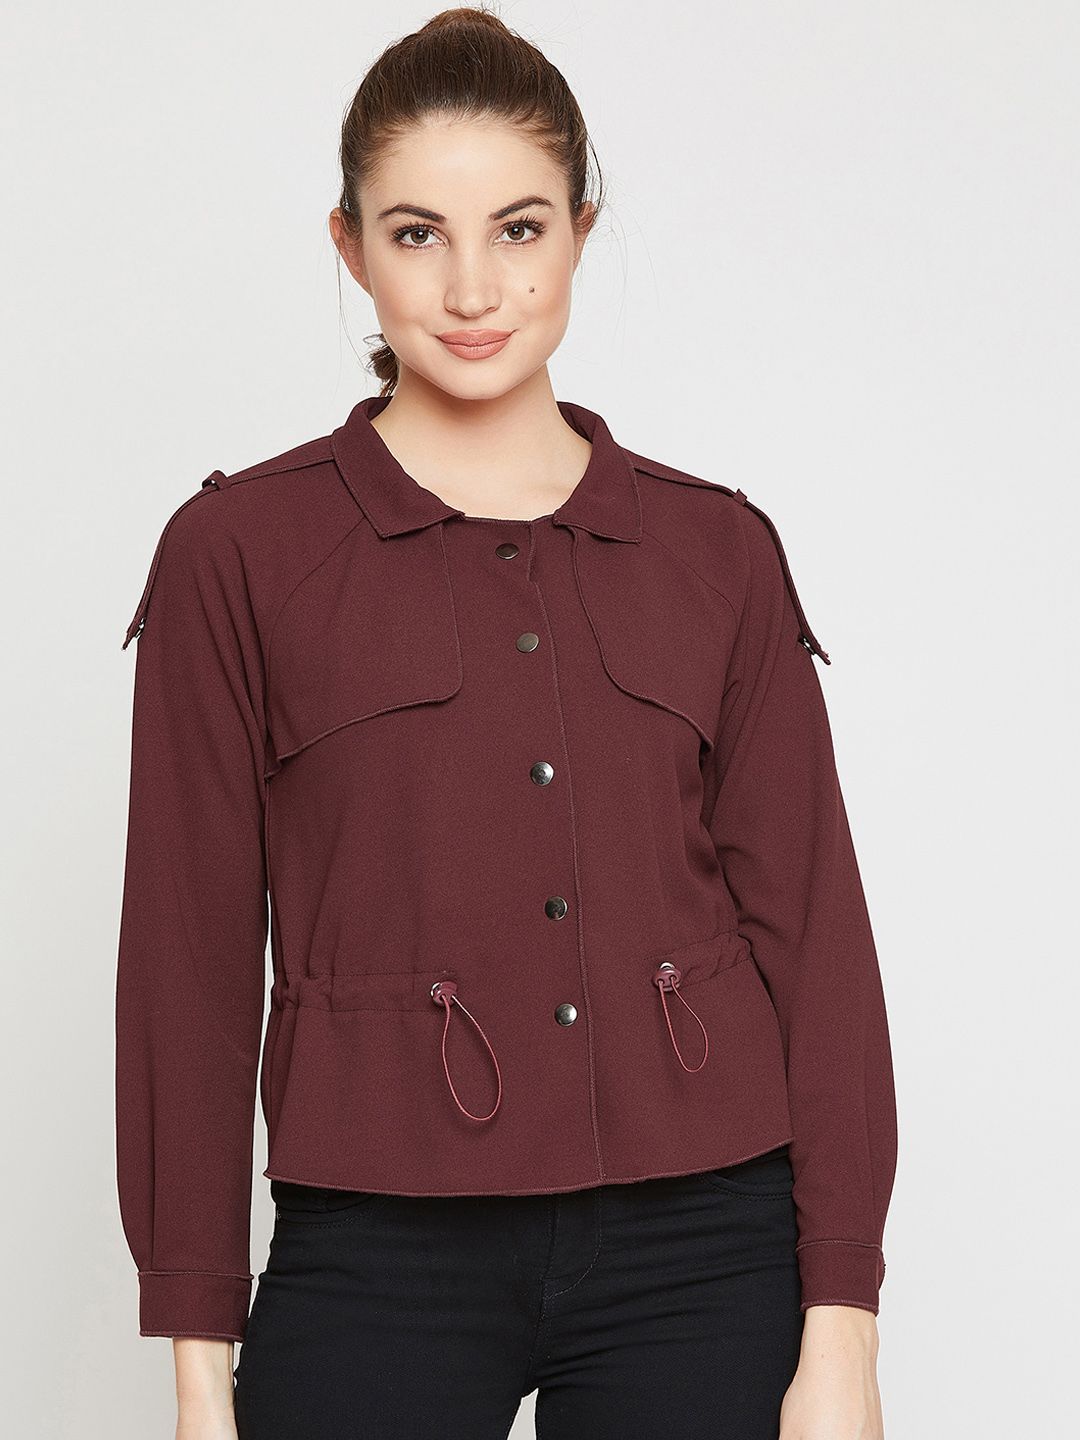 Marie Claire Women Maroon Solid Tailored Jacket Price in India